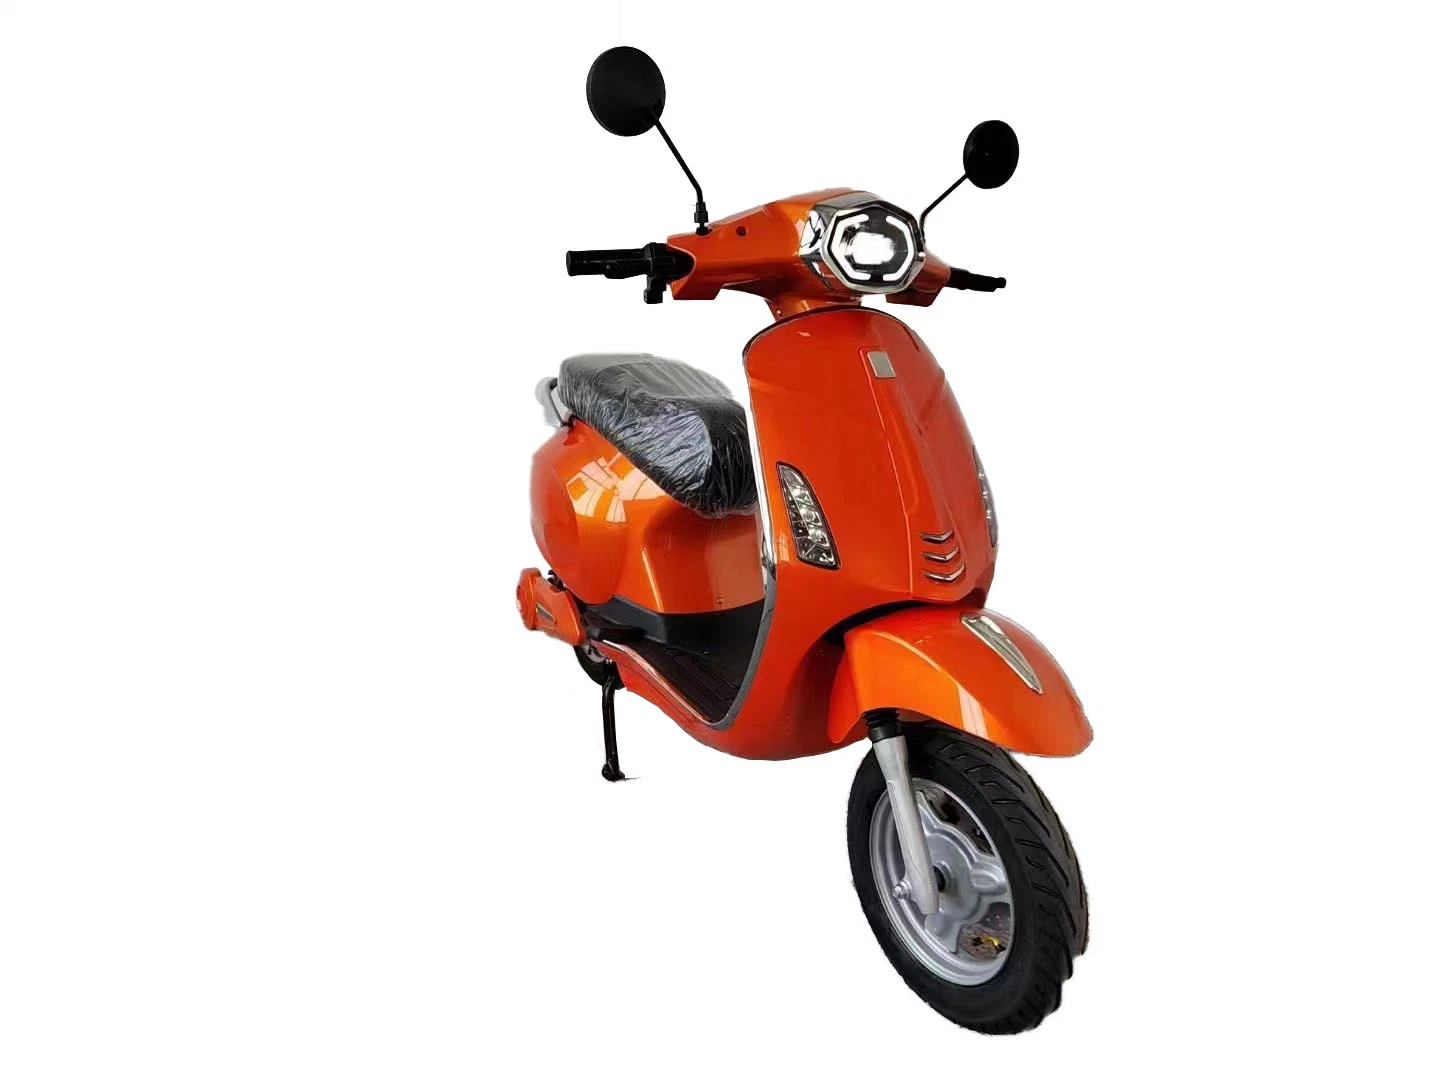 Fashion Model Electric Scooter Lithium/Lead-Acid Battery Version Electric Motorcycle Bicycle -Tsl